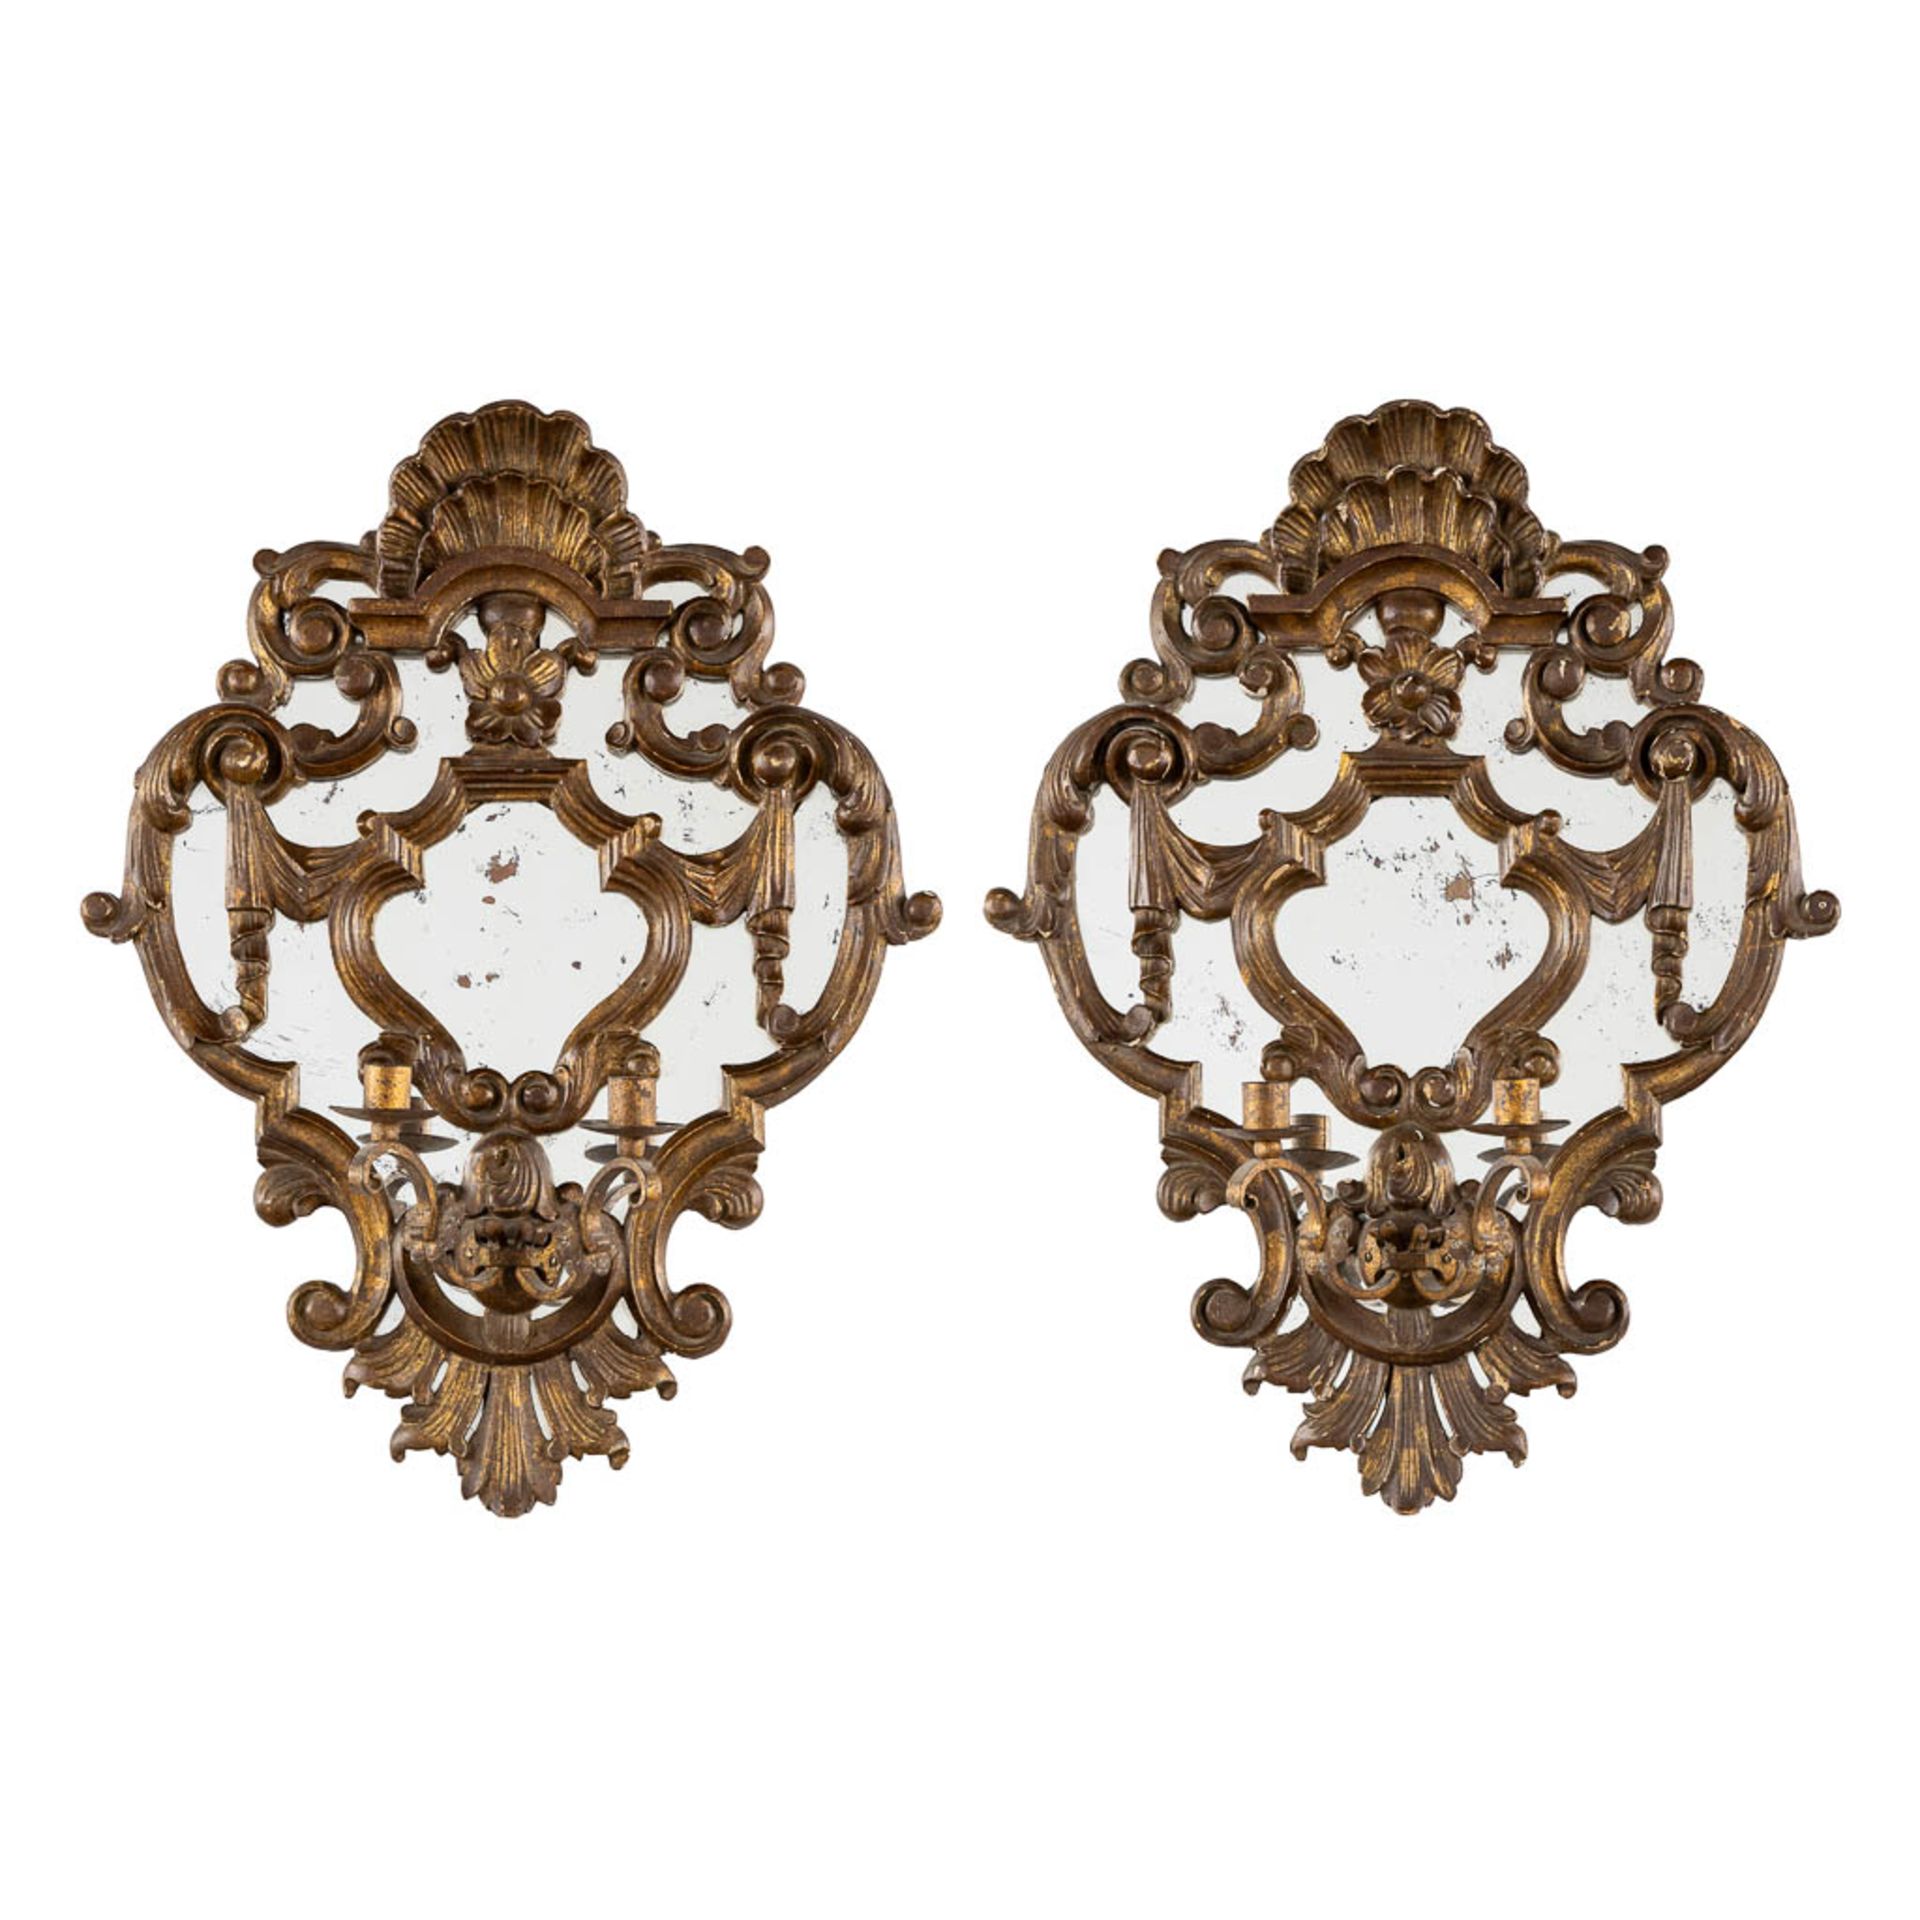 A pair of antique Italian and wood-sculptured wall lamps with mirror's. 19th C. (L:13 x W:41 x H:51